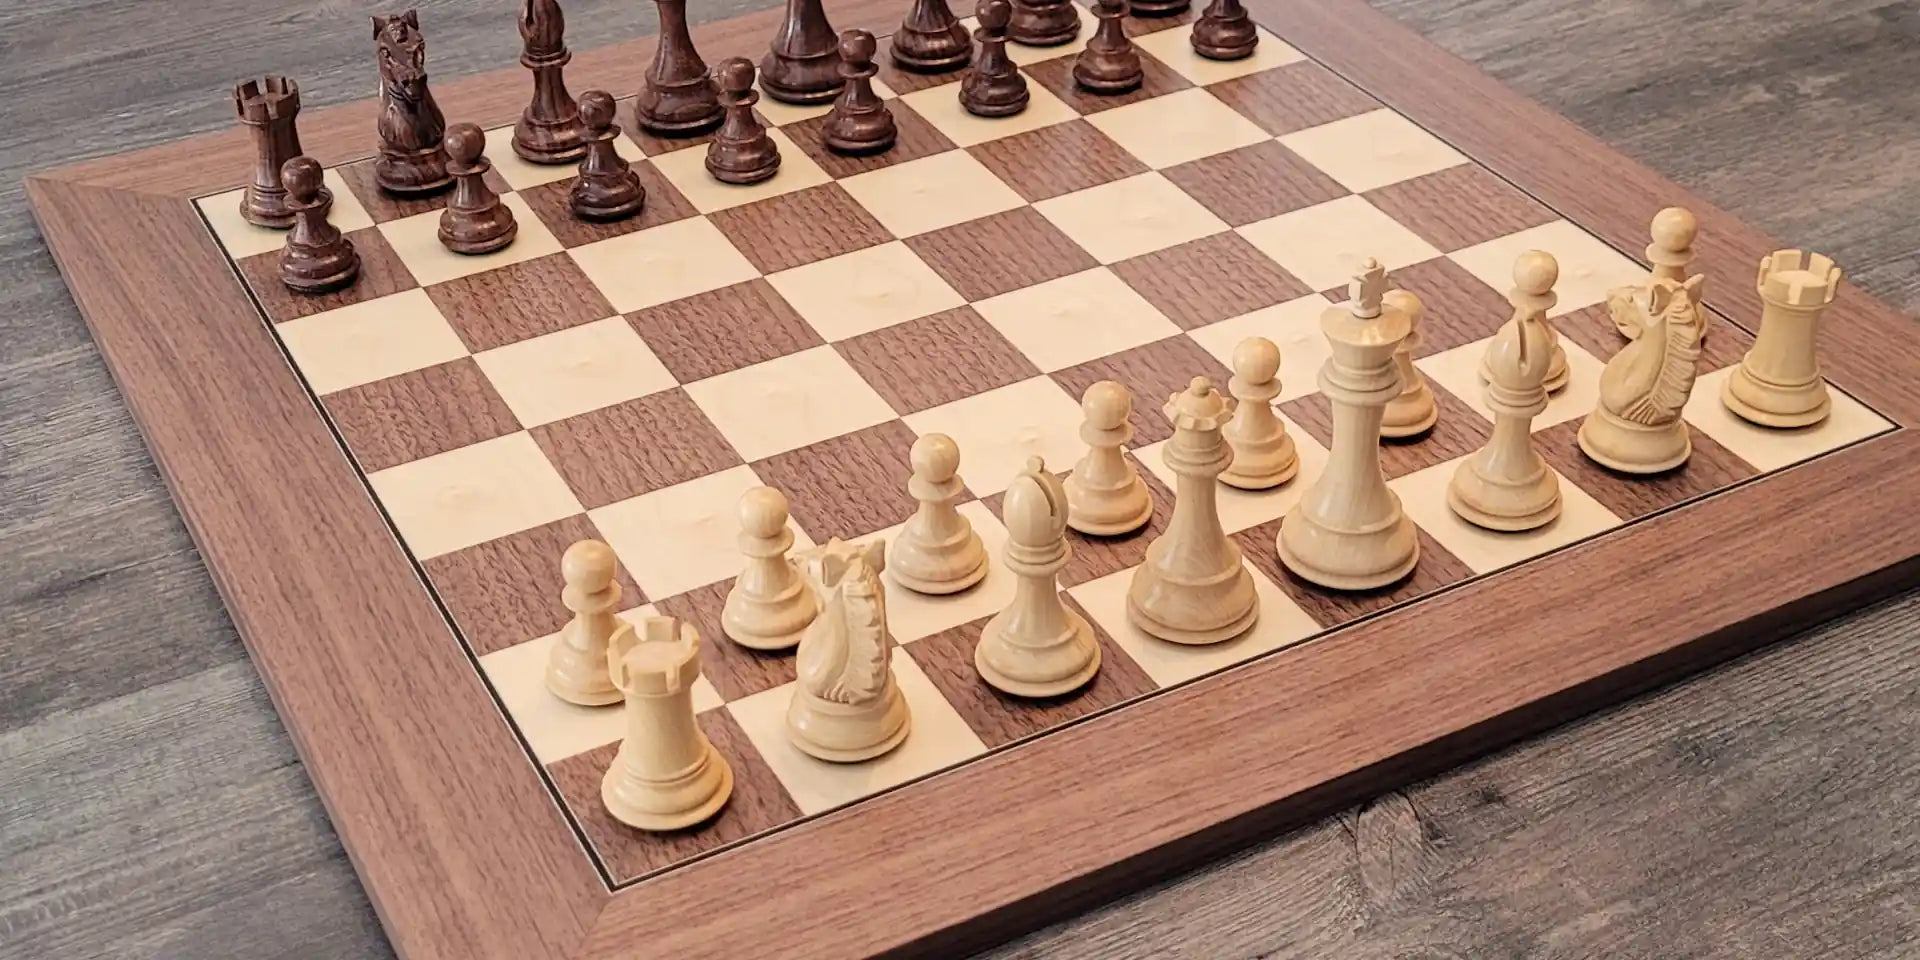 Chess 101 Everything A New Chess Player Needs to Know